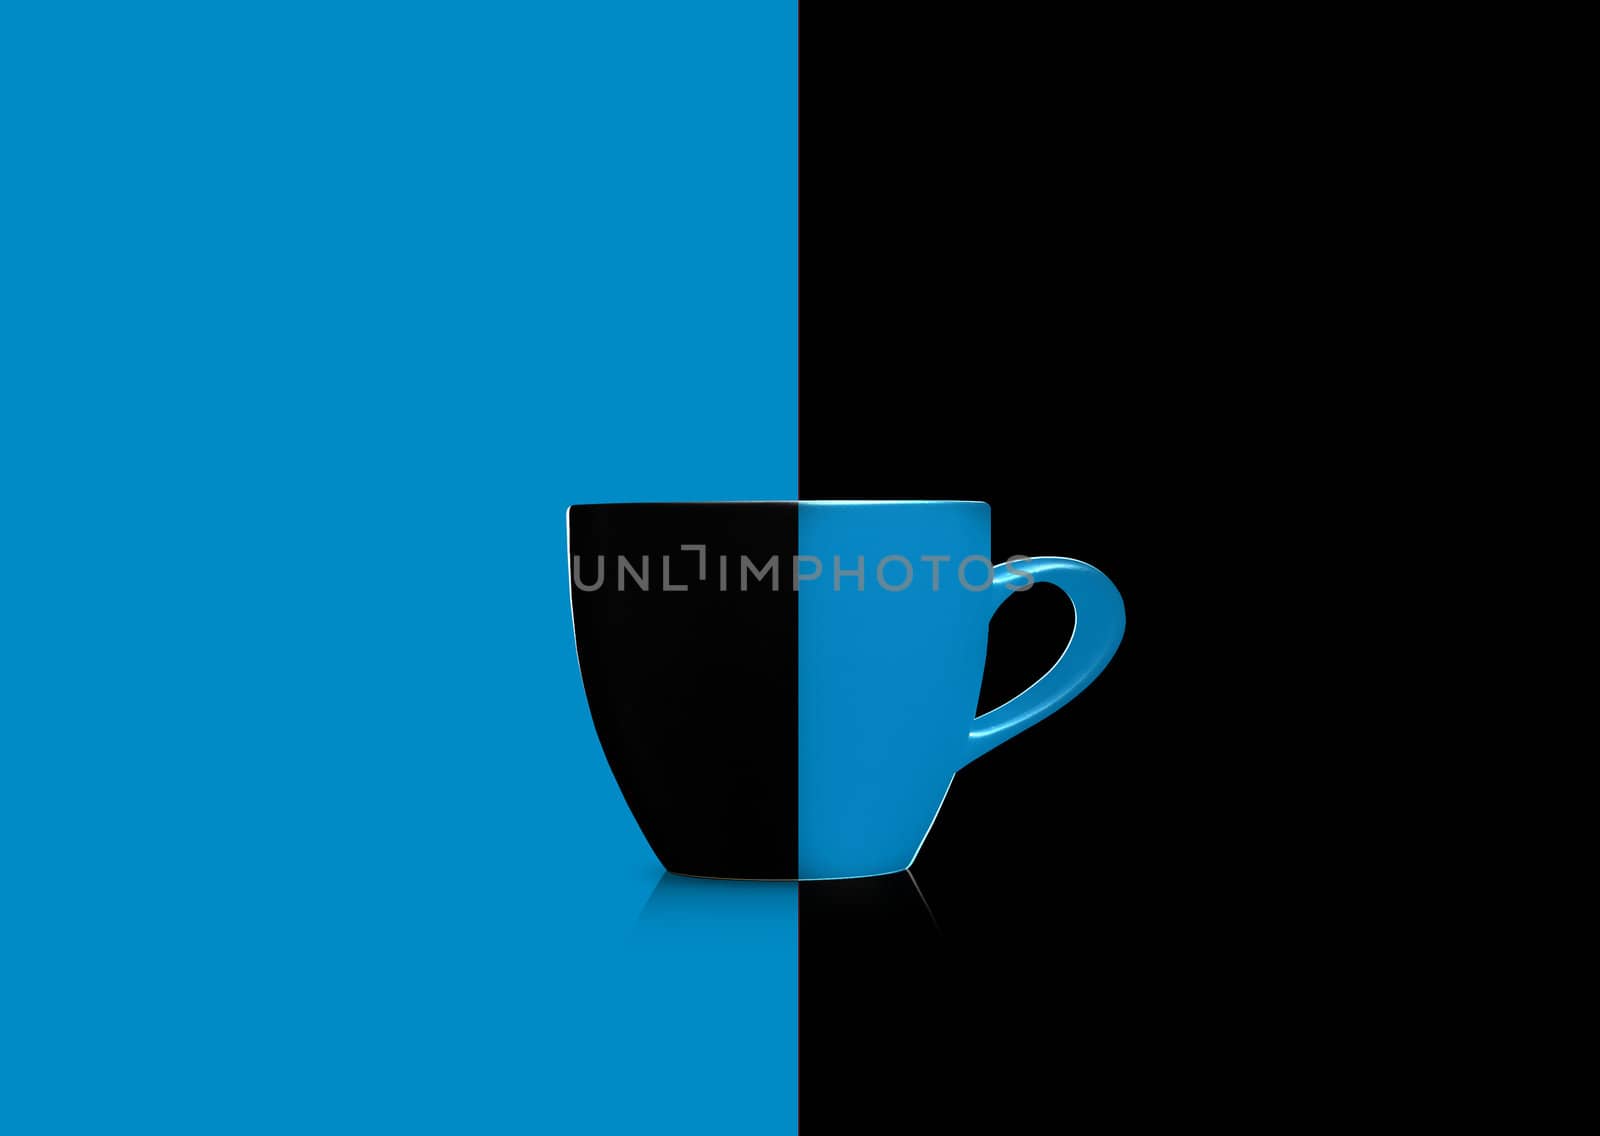 Two colors mug on blue and black background.